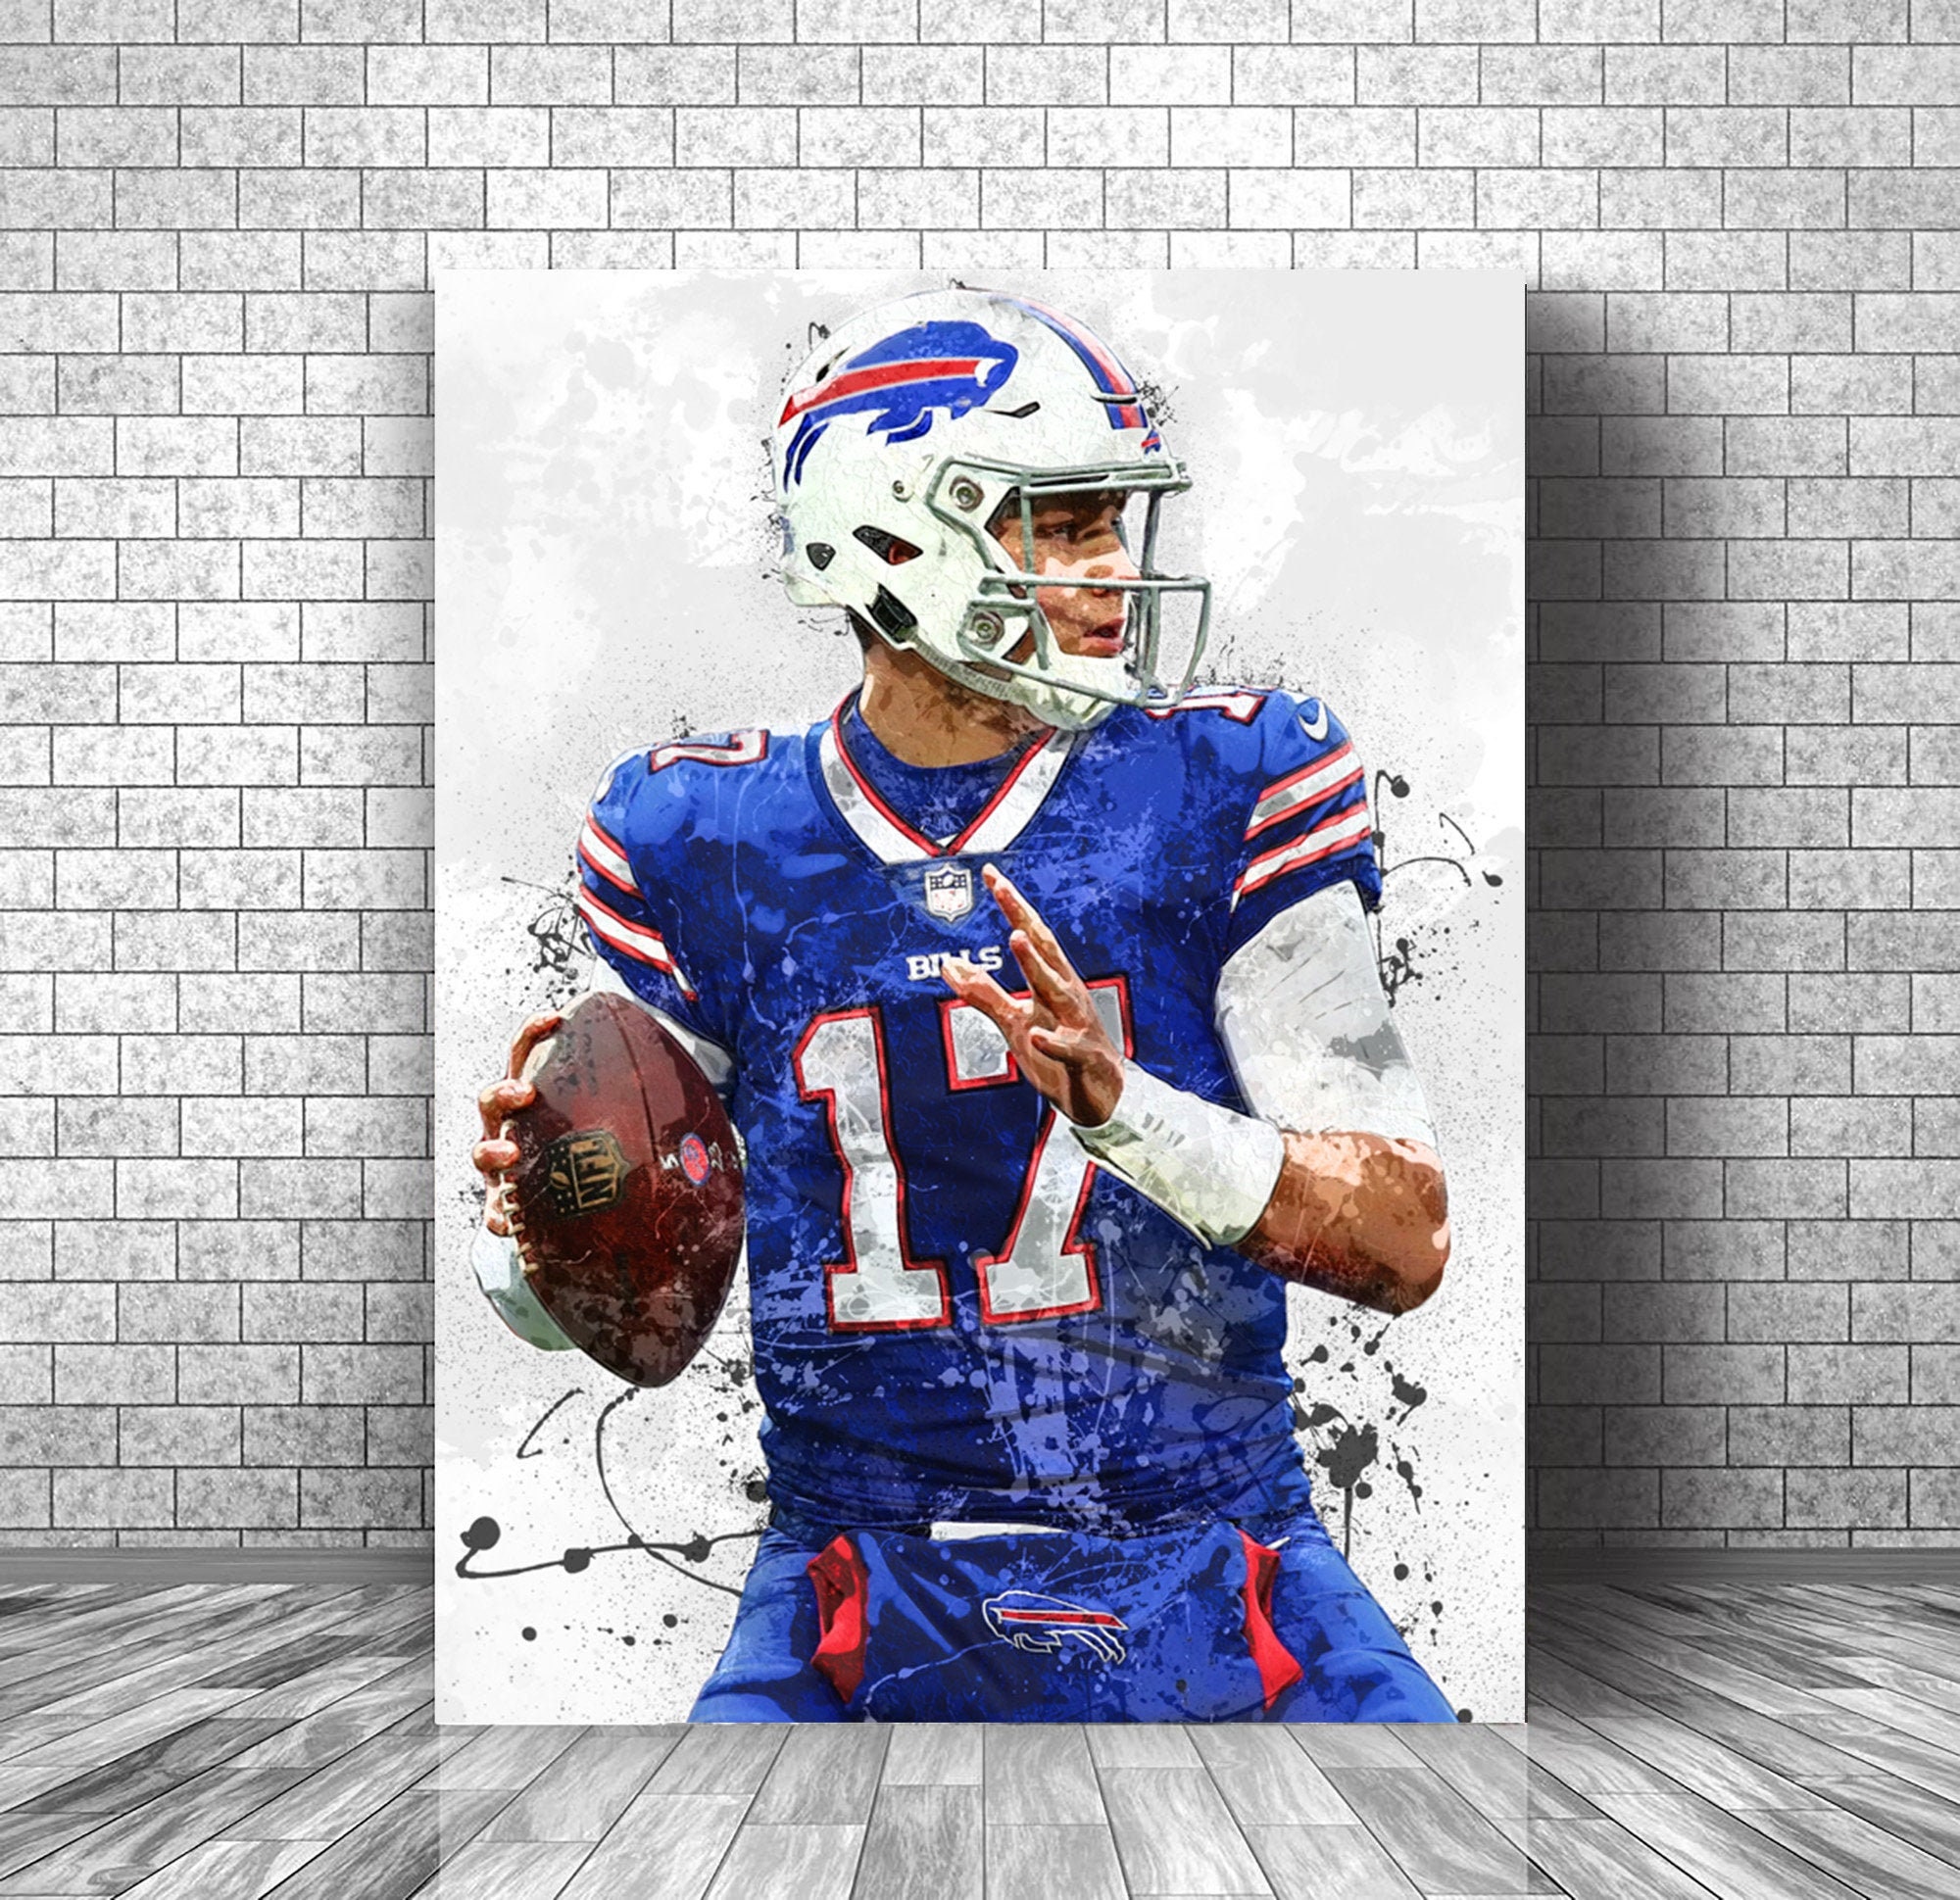 Josh Allen Canvas  Buffalo Bills  Poster   Premium Wall Art  Art Print Decor, Great for Him or Her, Man Cave or Game Room